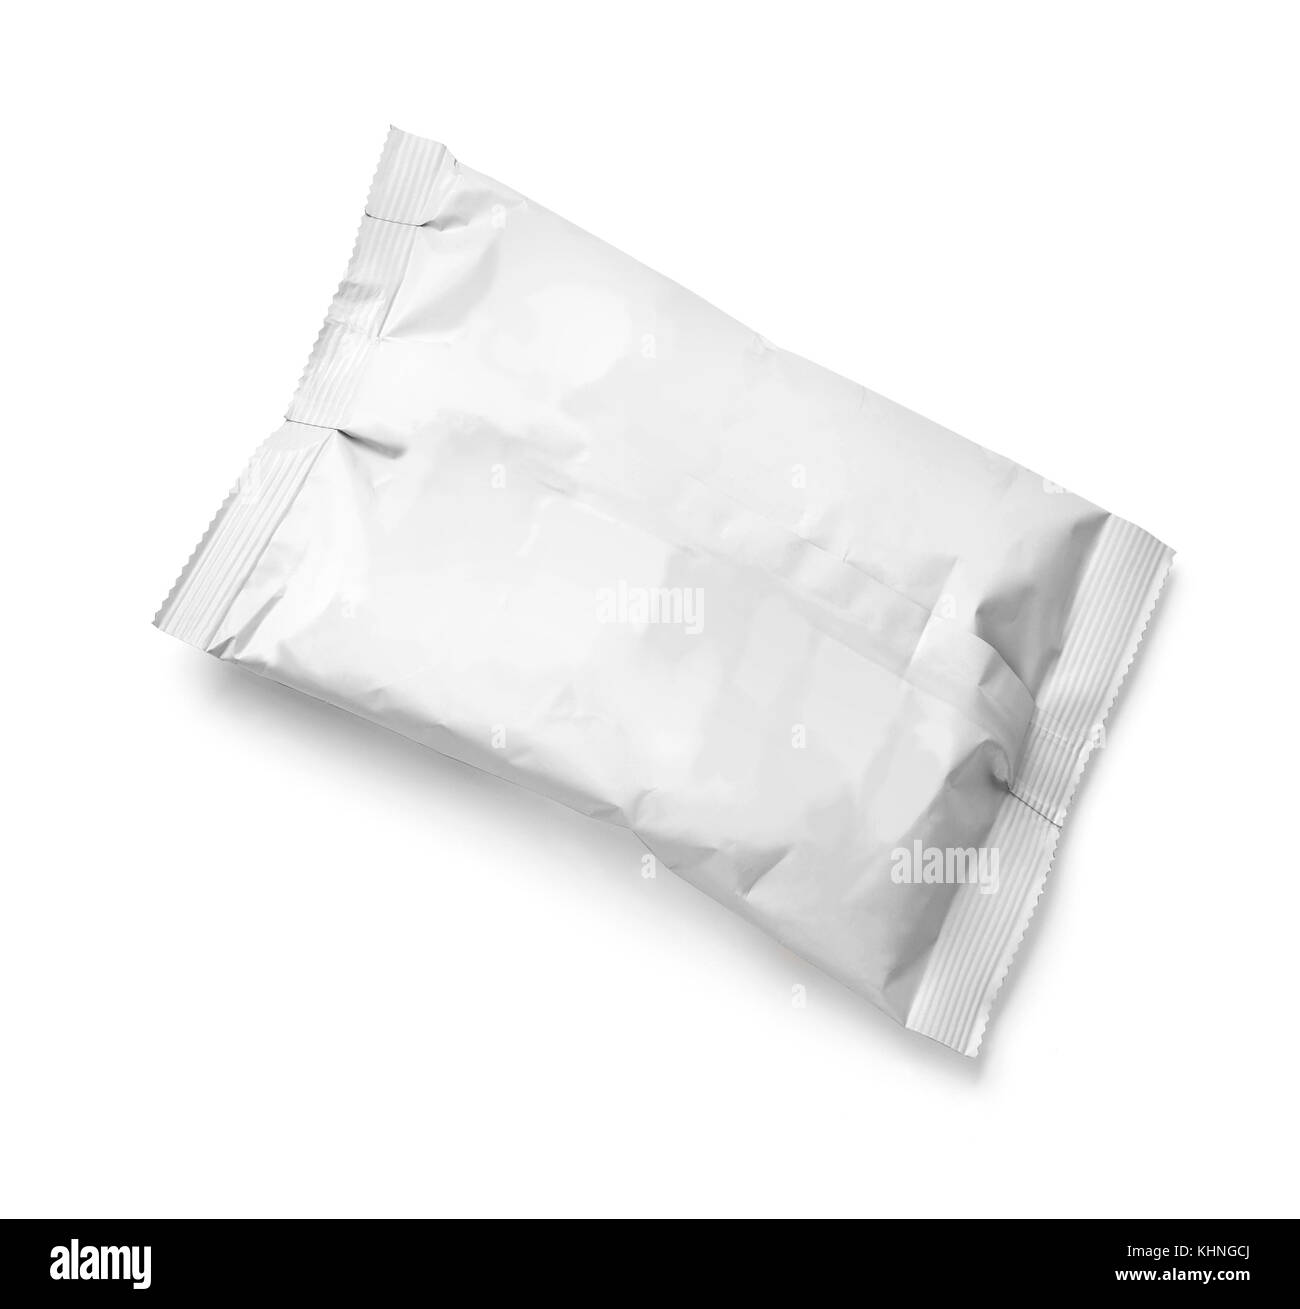 White Blank Foil Food Snack Sachet Bag Packaging For Coffee, Salt, Sugar, Pepper, Spices, Sachet, Sweets, Chips, Cookies.. with clipping path Stock Photo